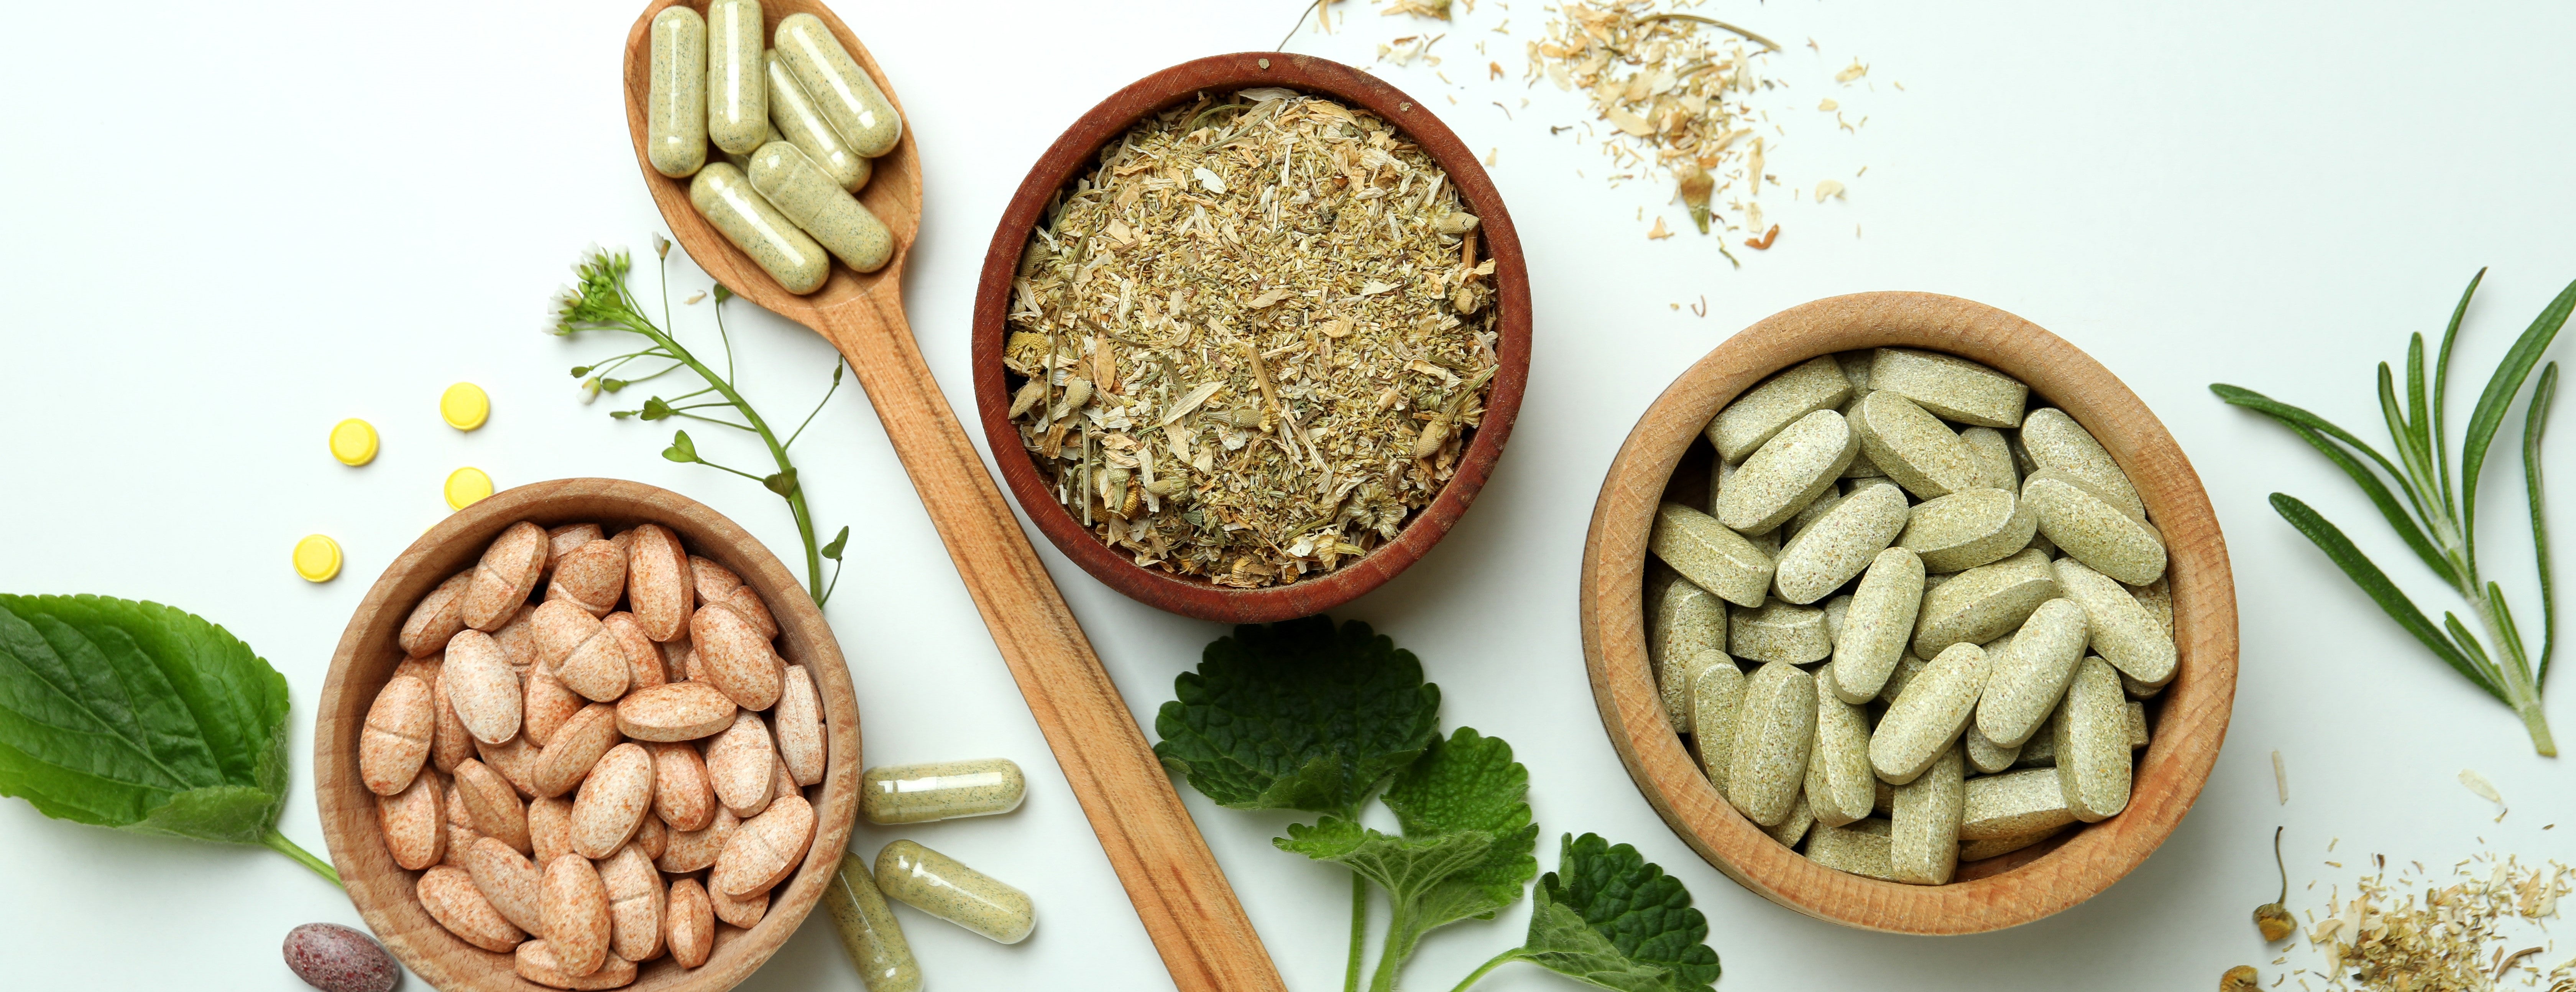 Natural Dietary Supplements Proven To Improve Your Health